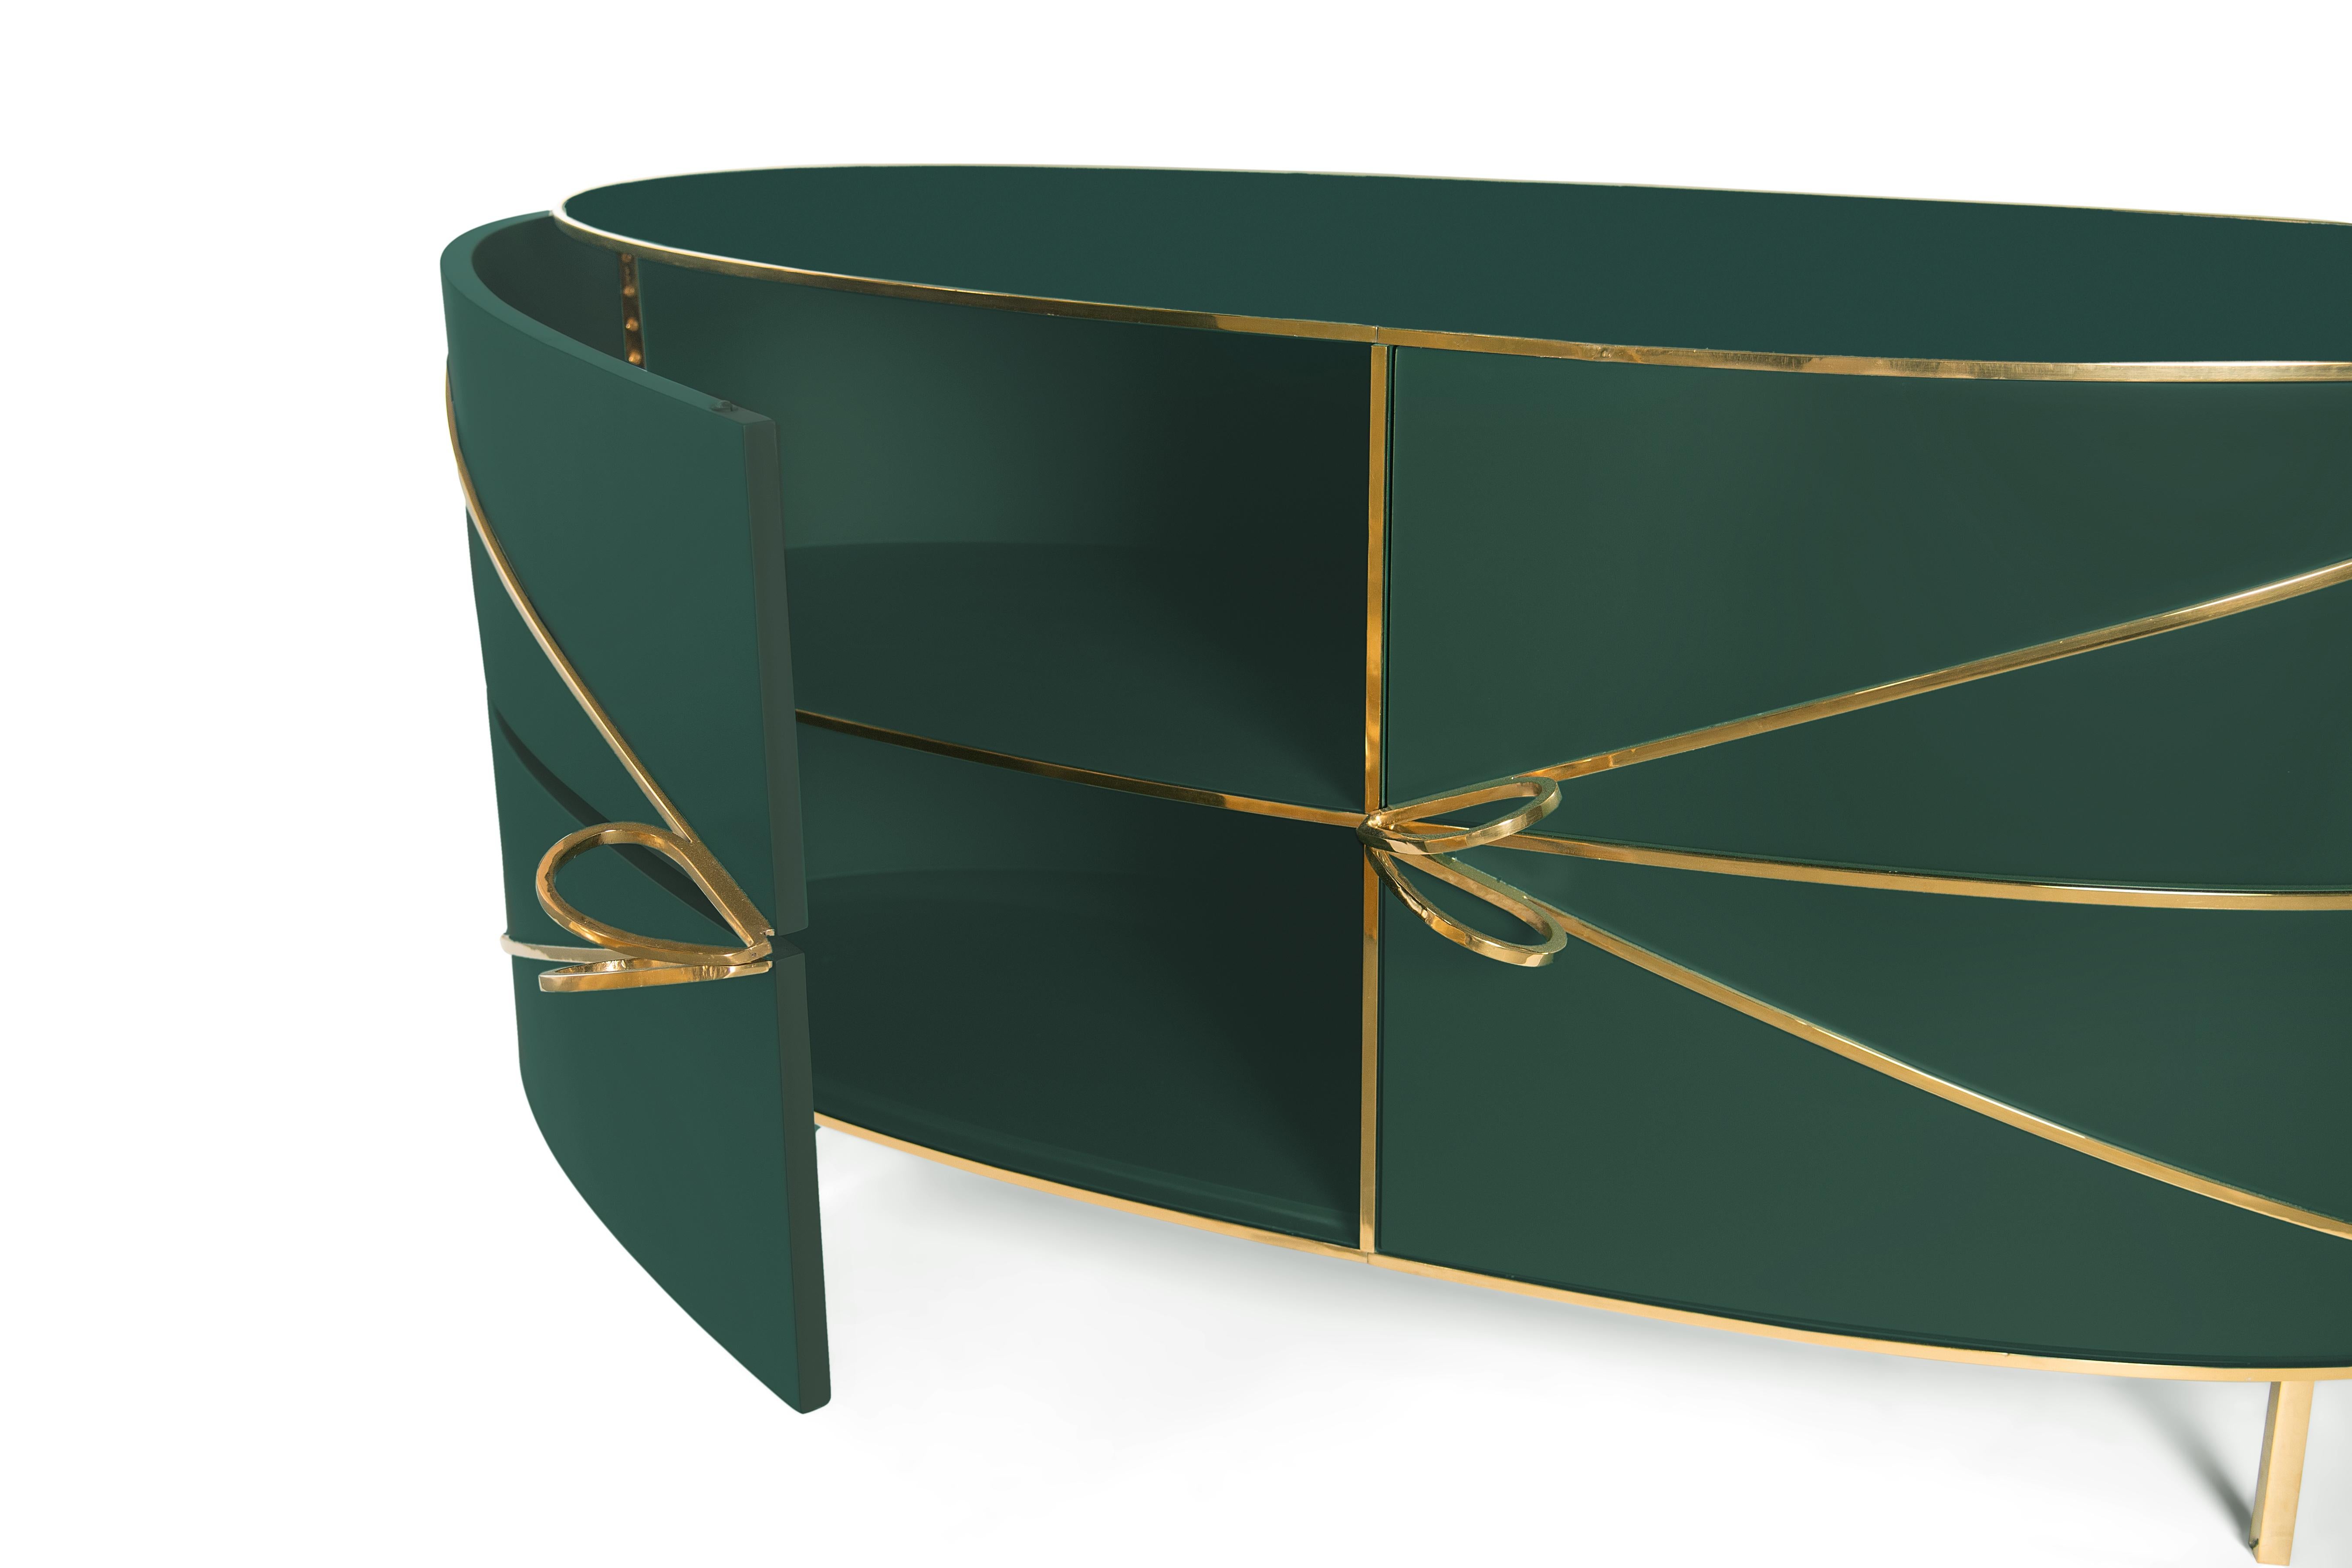 88 Secrets Green Sideboard with Gold Trims by Nika Zupanc is a deep green cabinet in sensuous, feminine lines with luxurious metal trims in gold. A statement piece in any interior space! 

Nika Zupanc, a strikingly renowned Slovenian designer, never